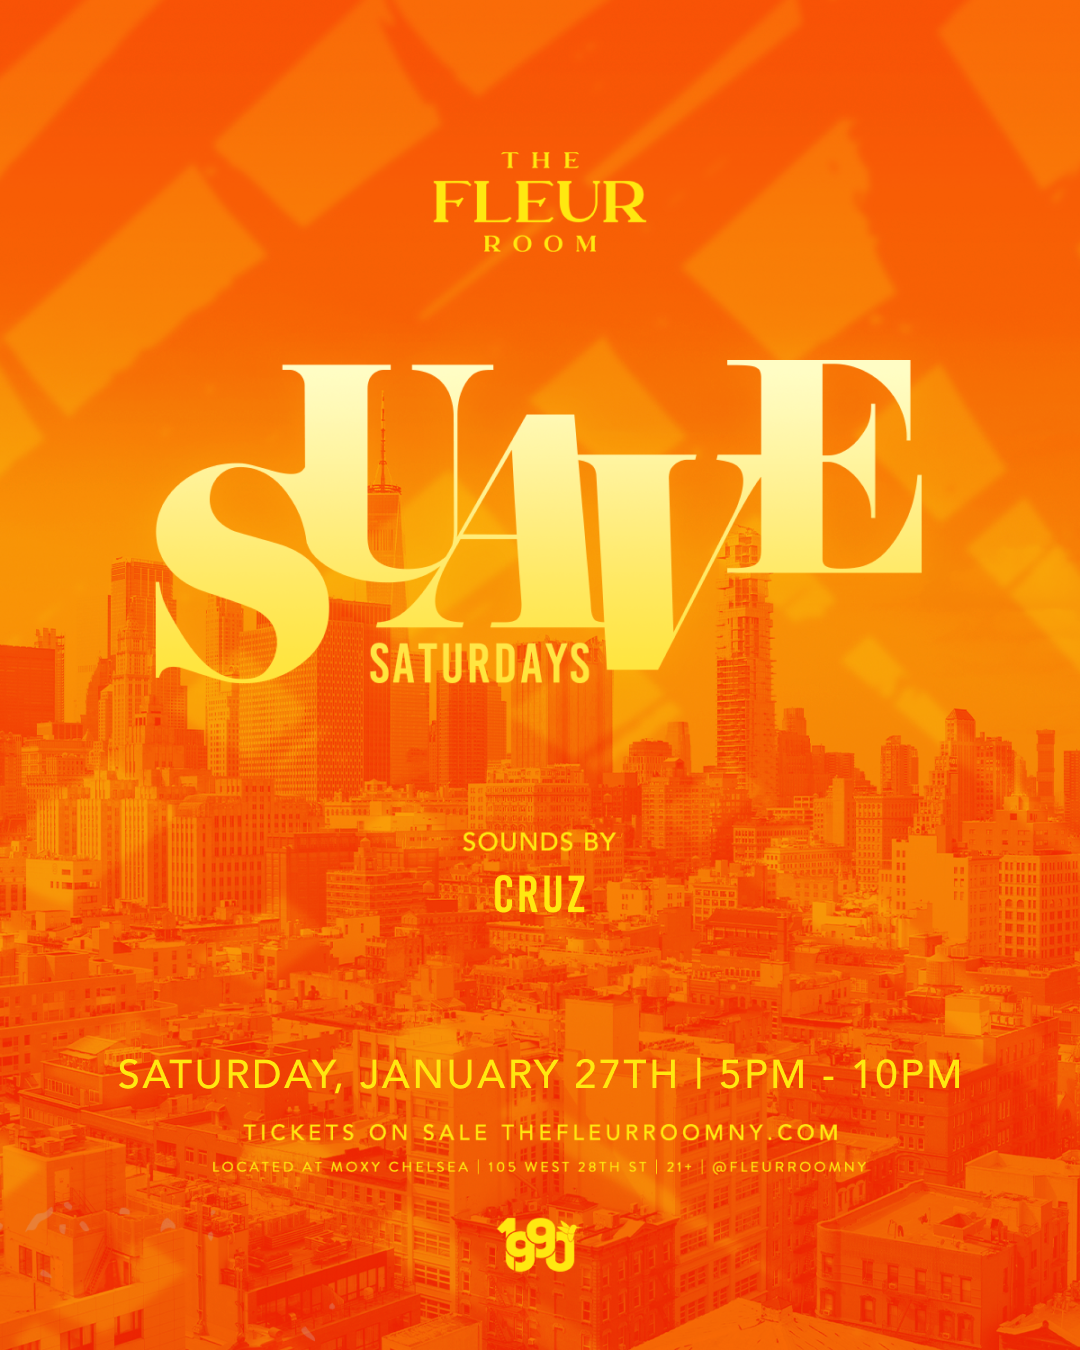 The Ultimate Daytime Party Experience in NYC, The Fleur Room